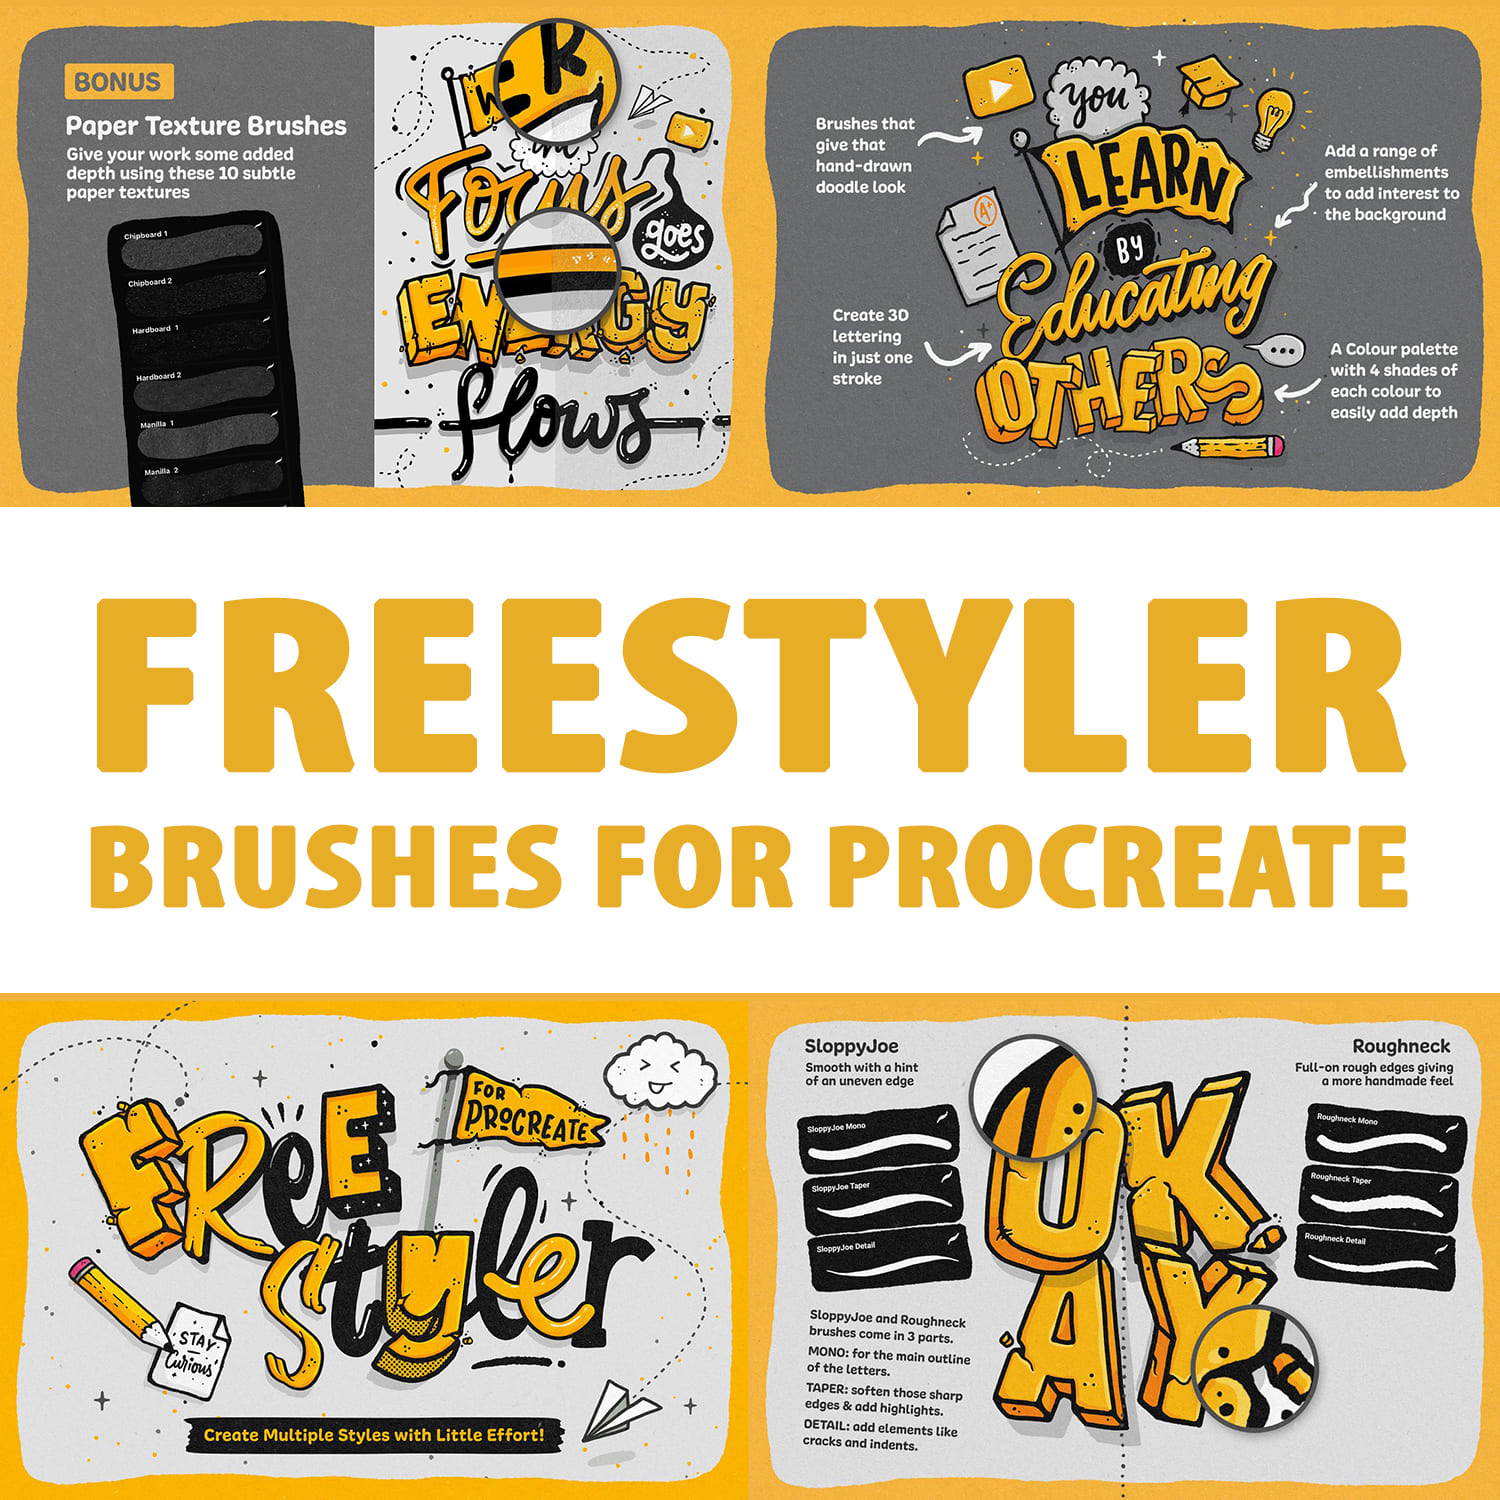 Freestyler - Brushes for Procreate main cover.